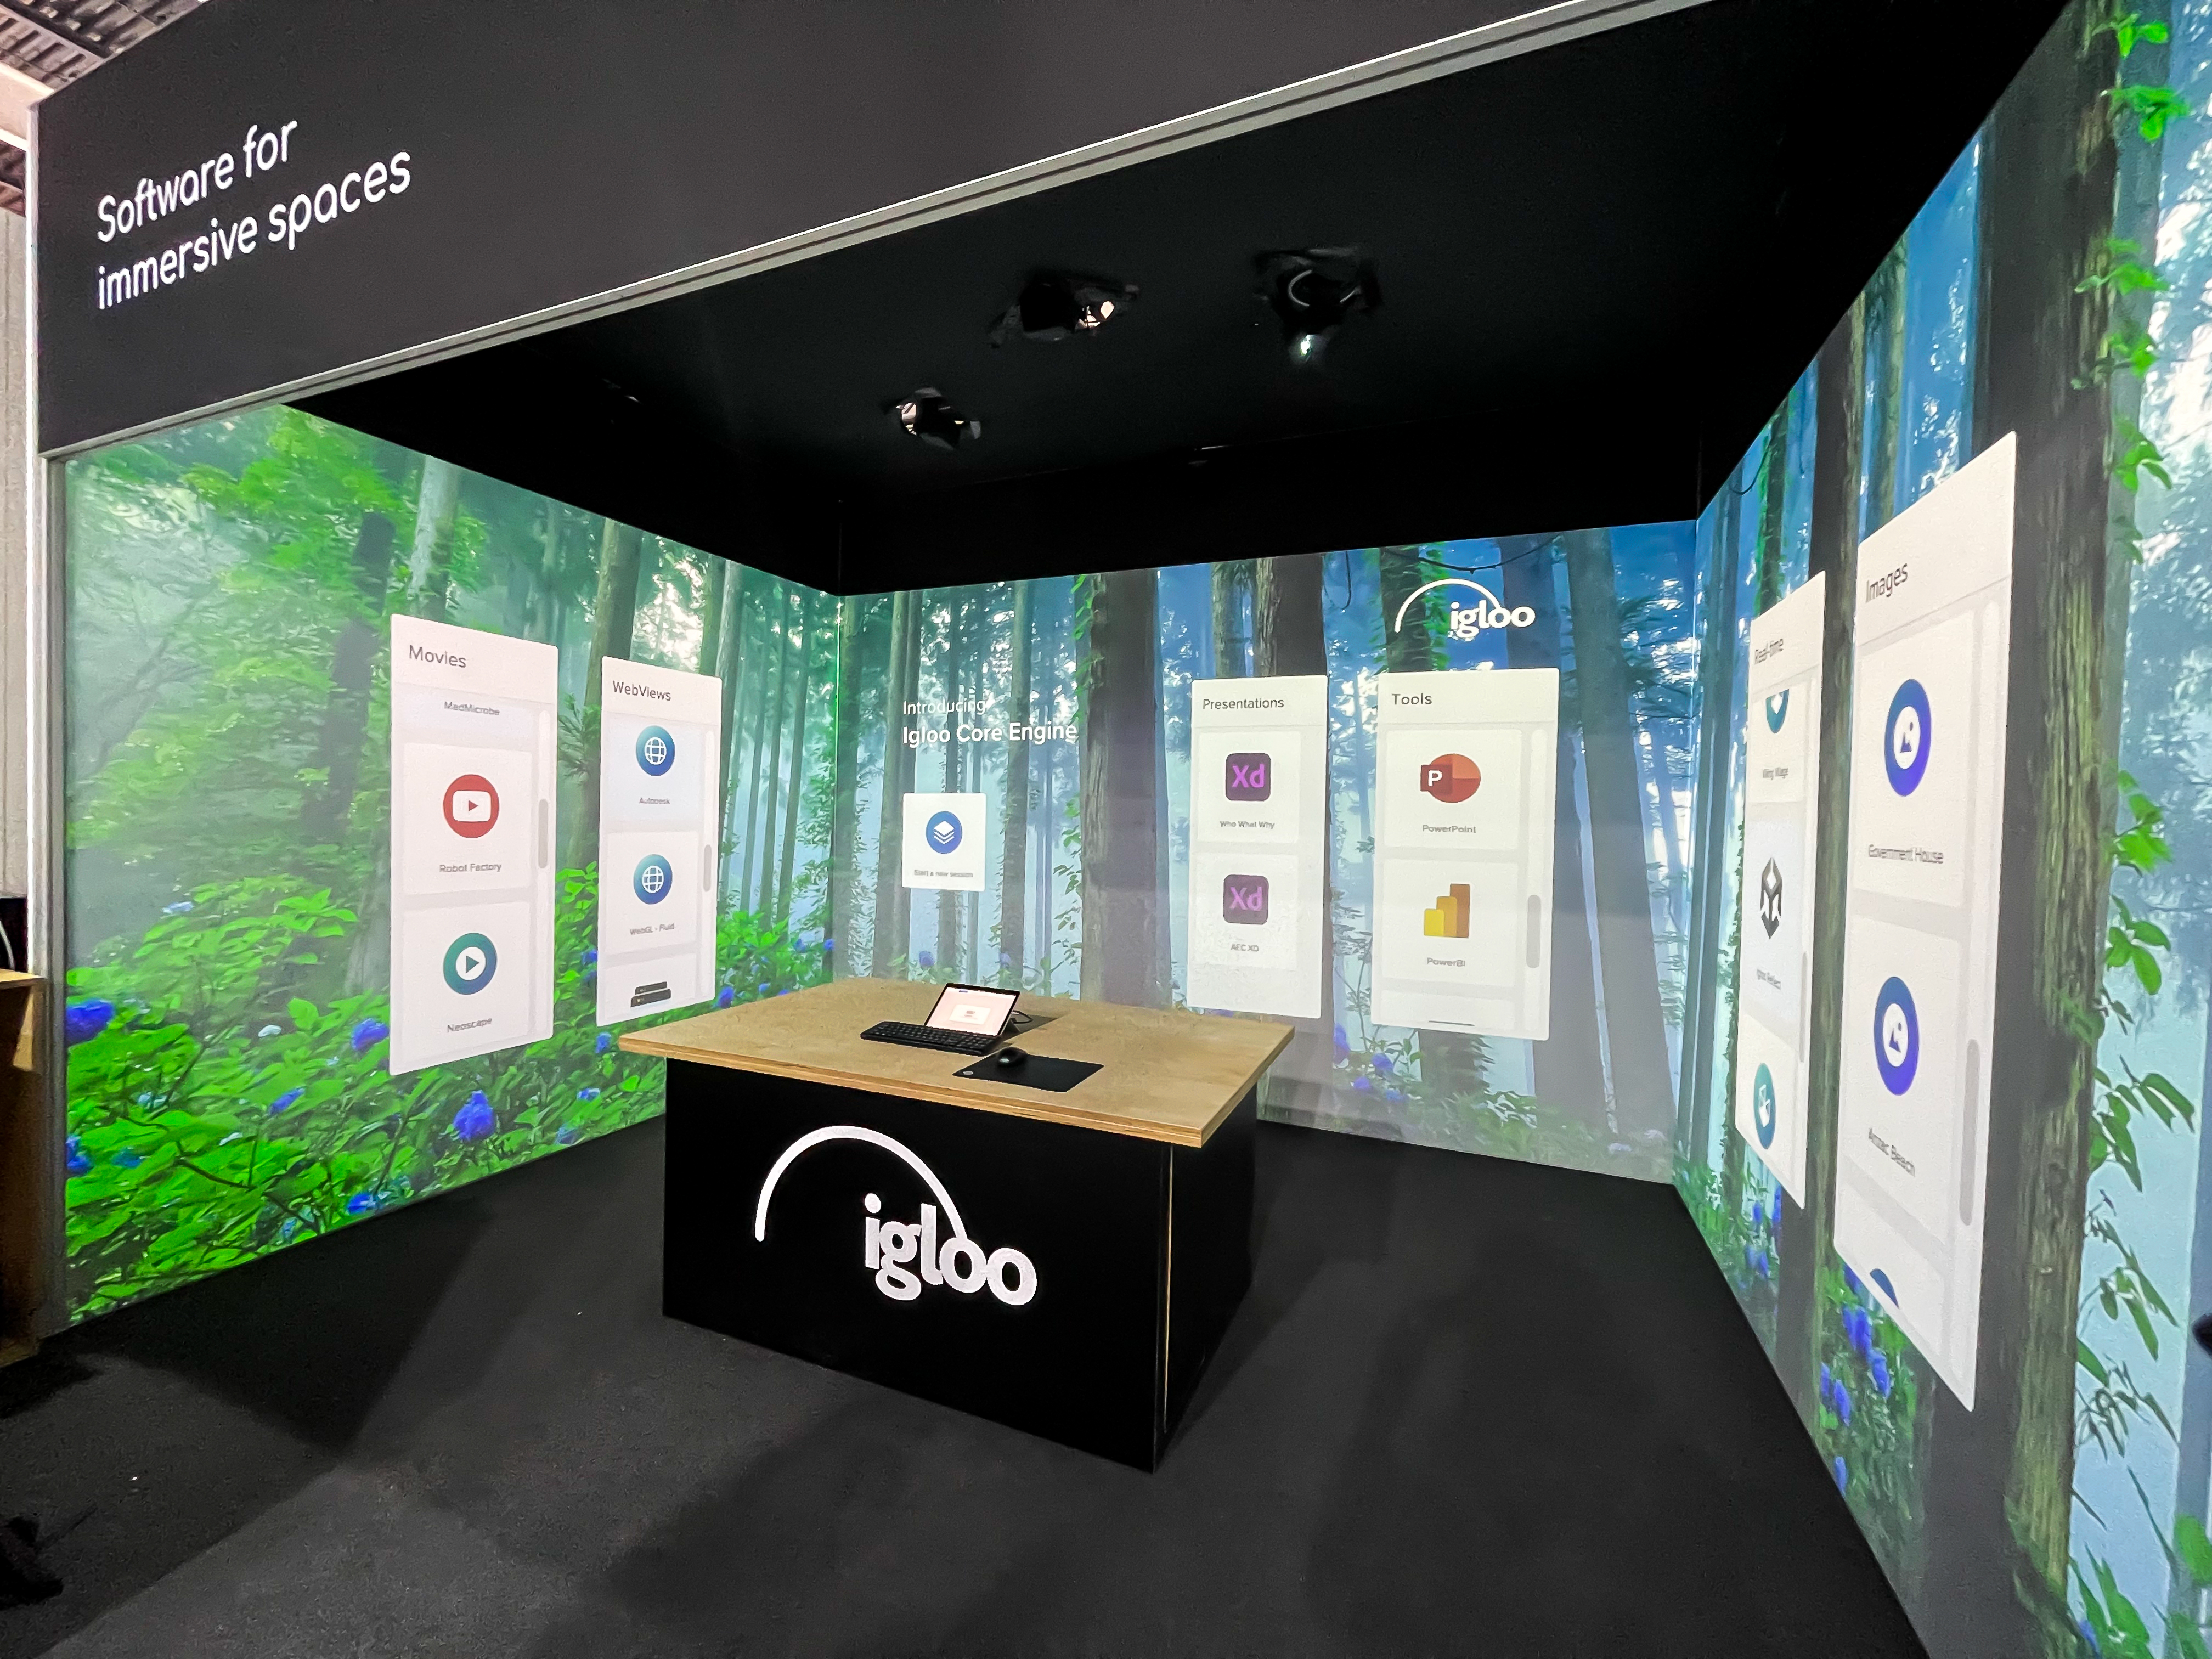 Igloo desk and demo set up at ISE